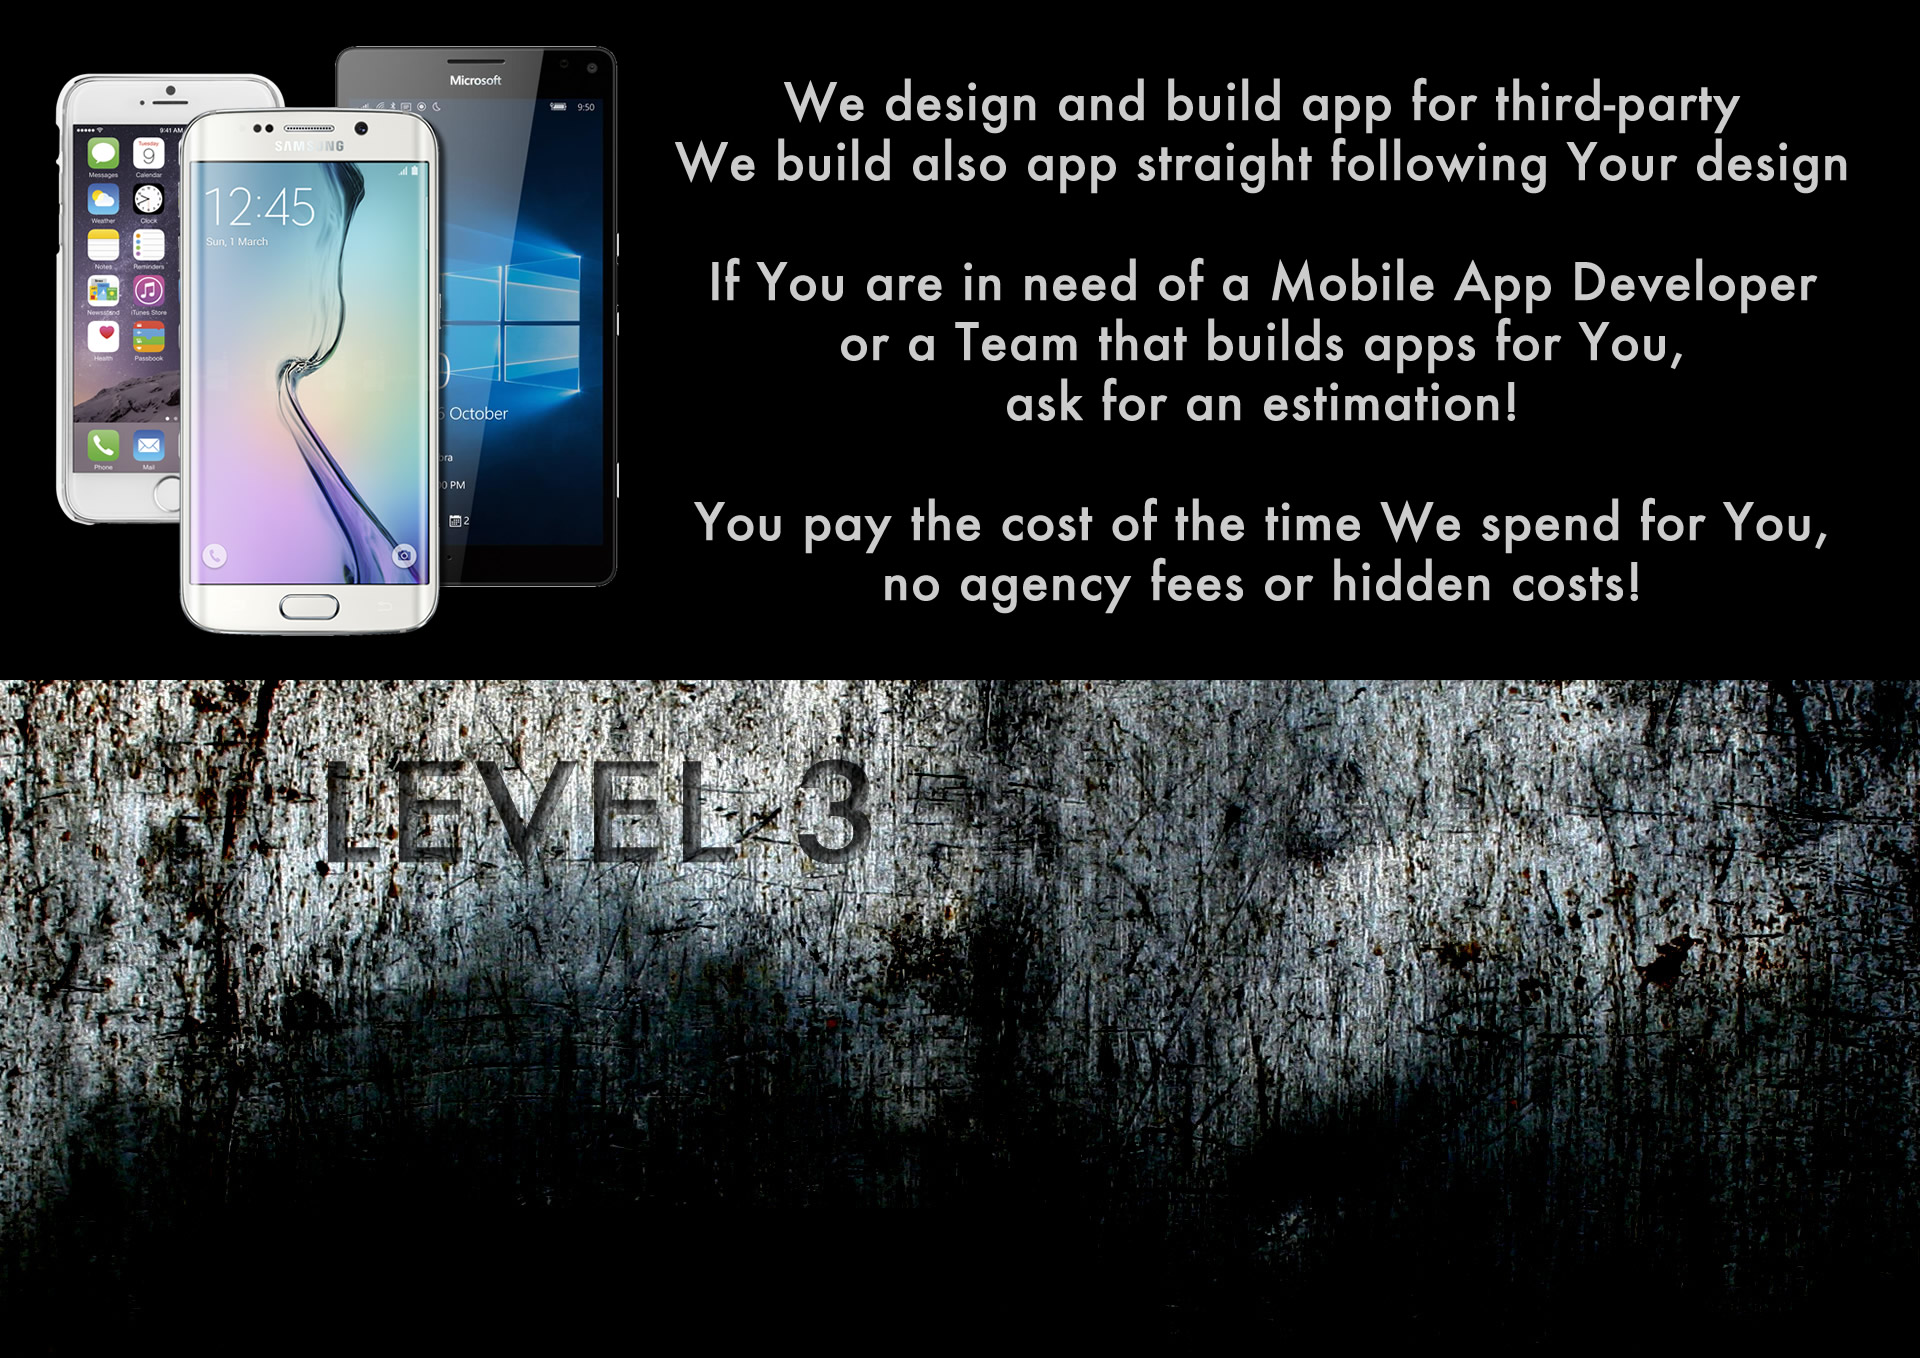 We design and build app for third-party We build also app straight following Your design If You are in need of a Mobile App Developer or a Team that builds apps for You, ask for an estimation! You pay the cost of the time We spend for You, no agency fees or hidden costs!